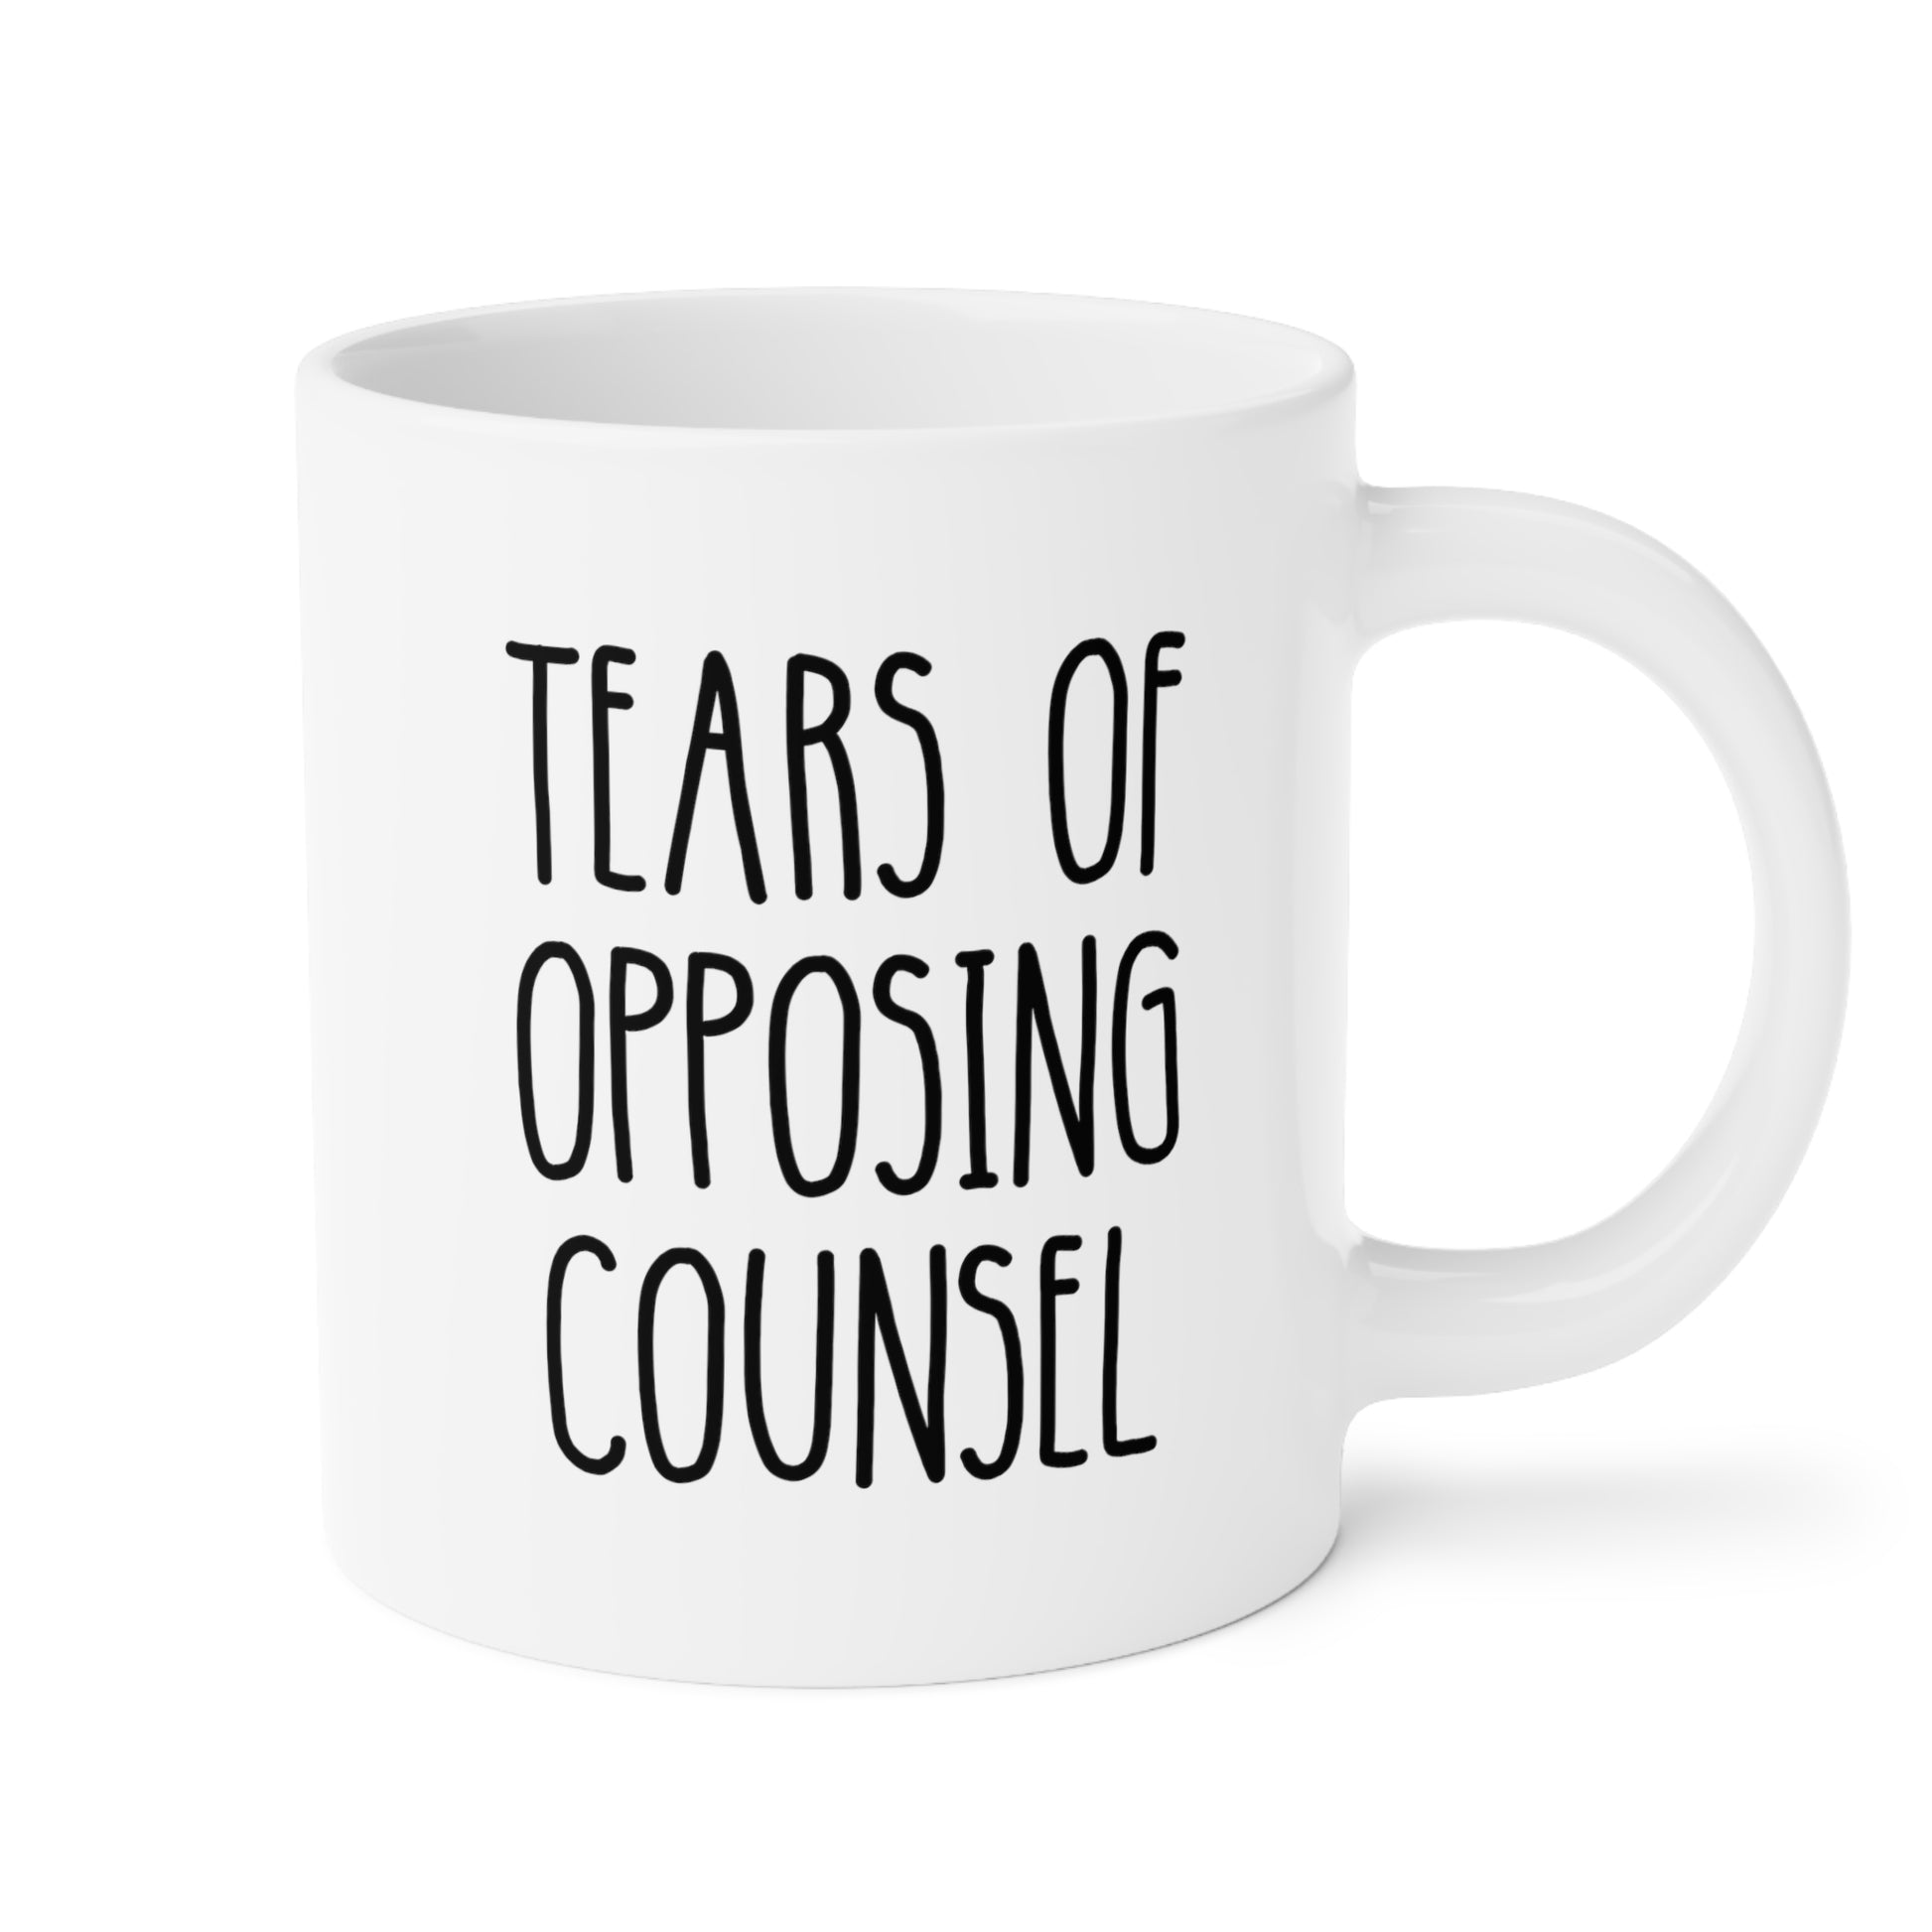 Tears Of Opposing Counsel 20oz white funny large coffee mug gift for lawyer law student graduation solicitor attorney prosecutor waveywares wavey wares wavywares wavy wares